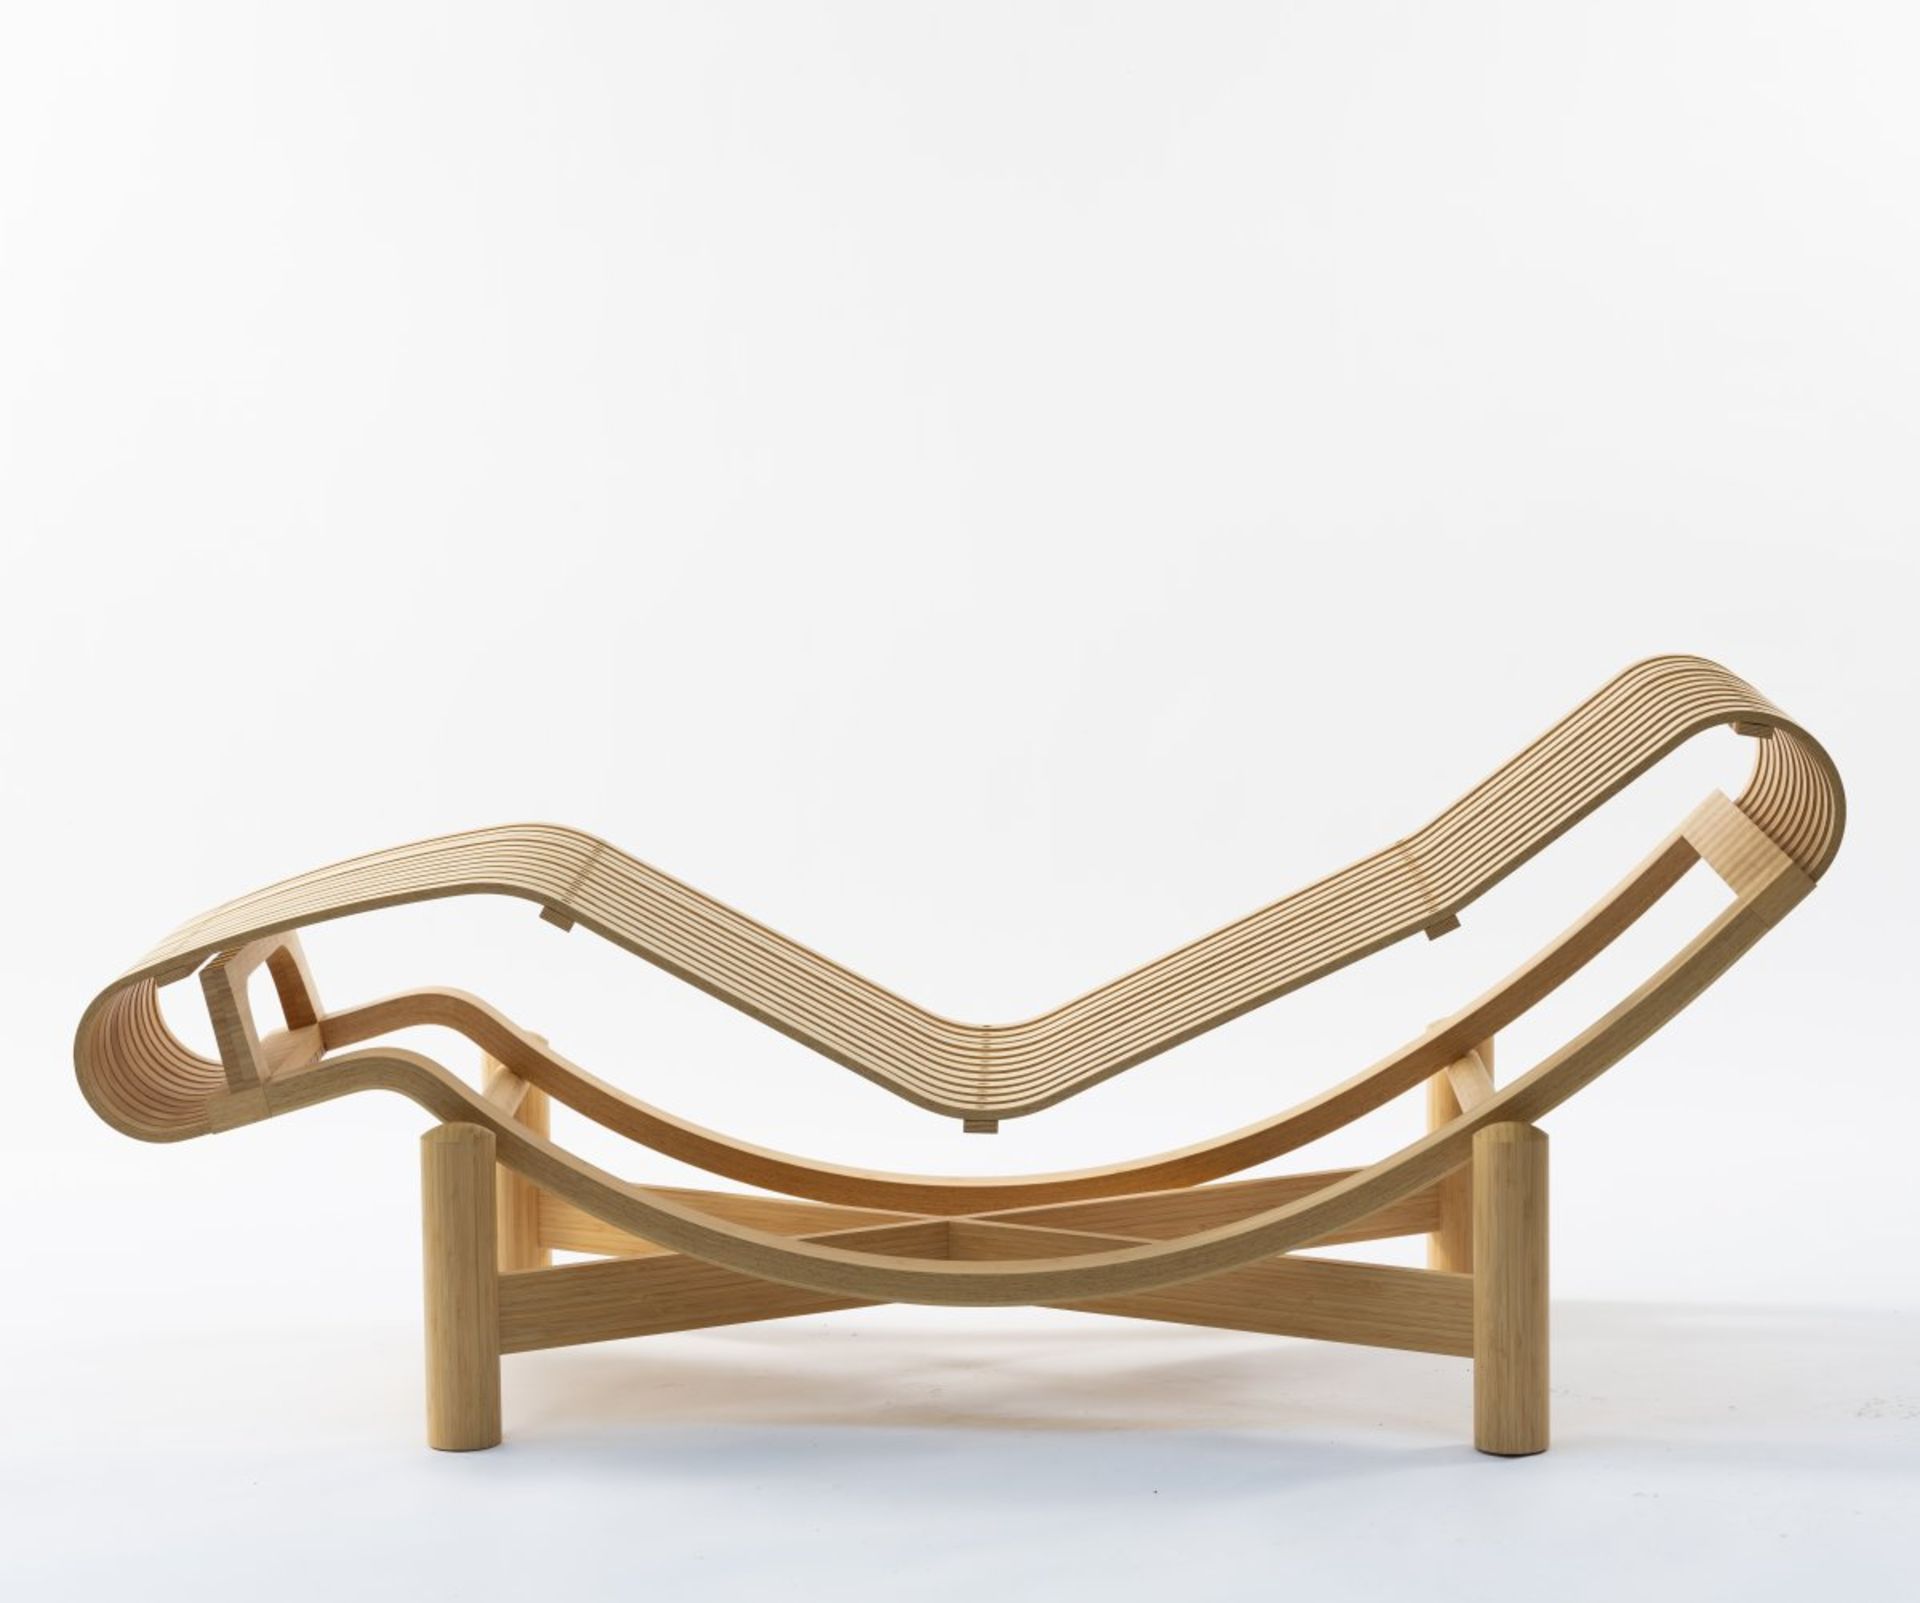 Charlotte Perriand, 'Tokyo' chaise longue, 1940